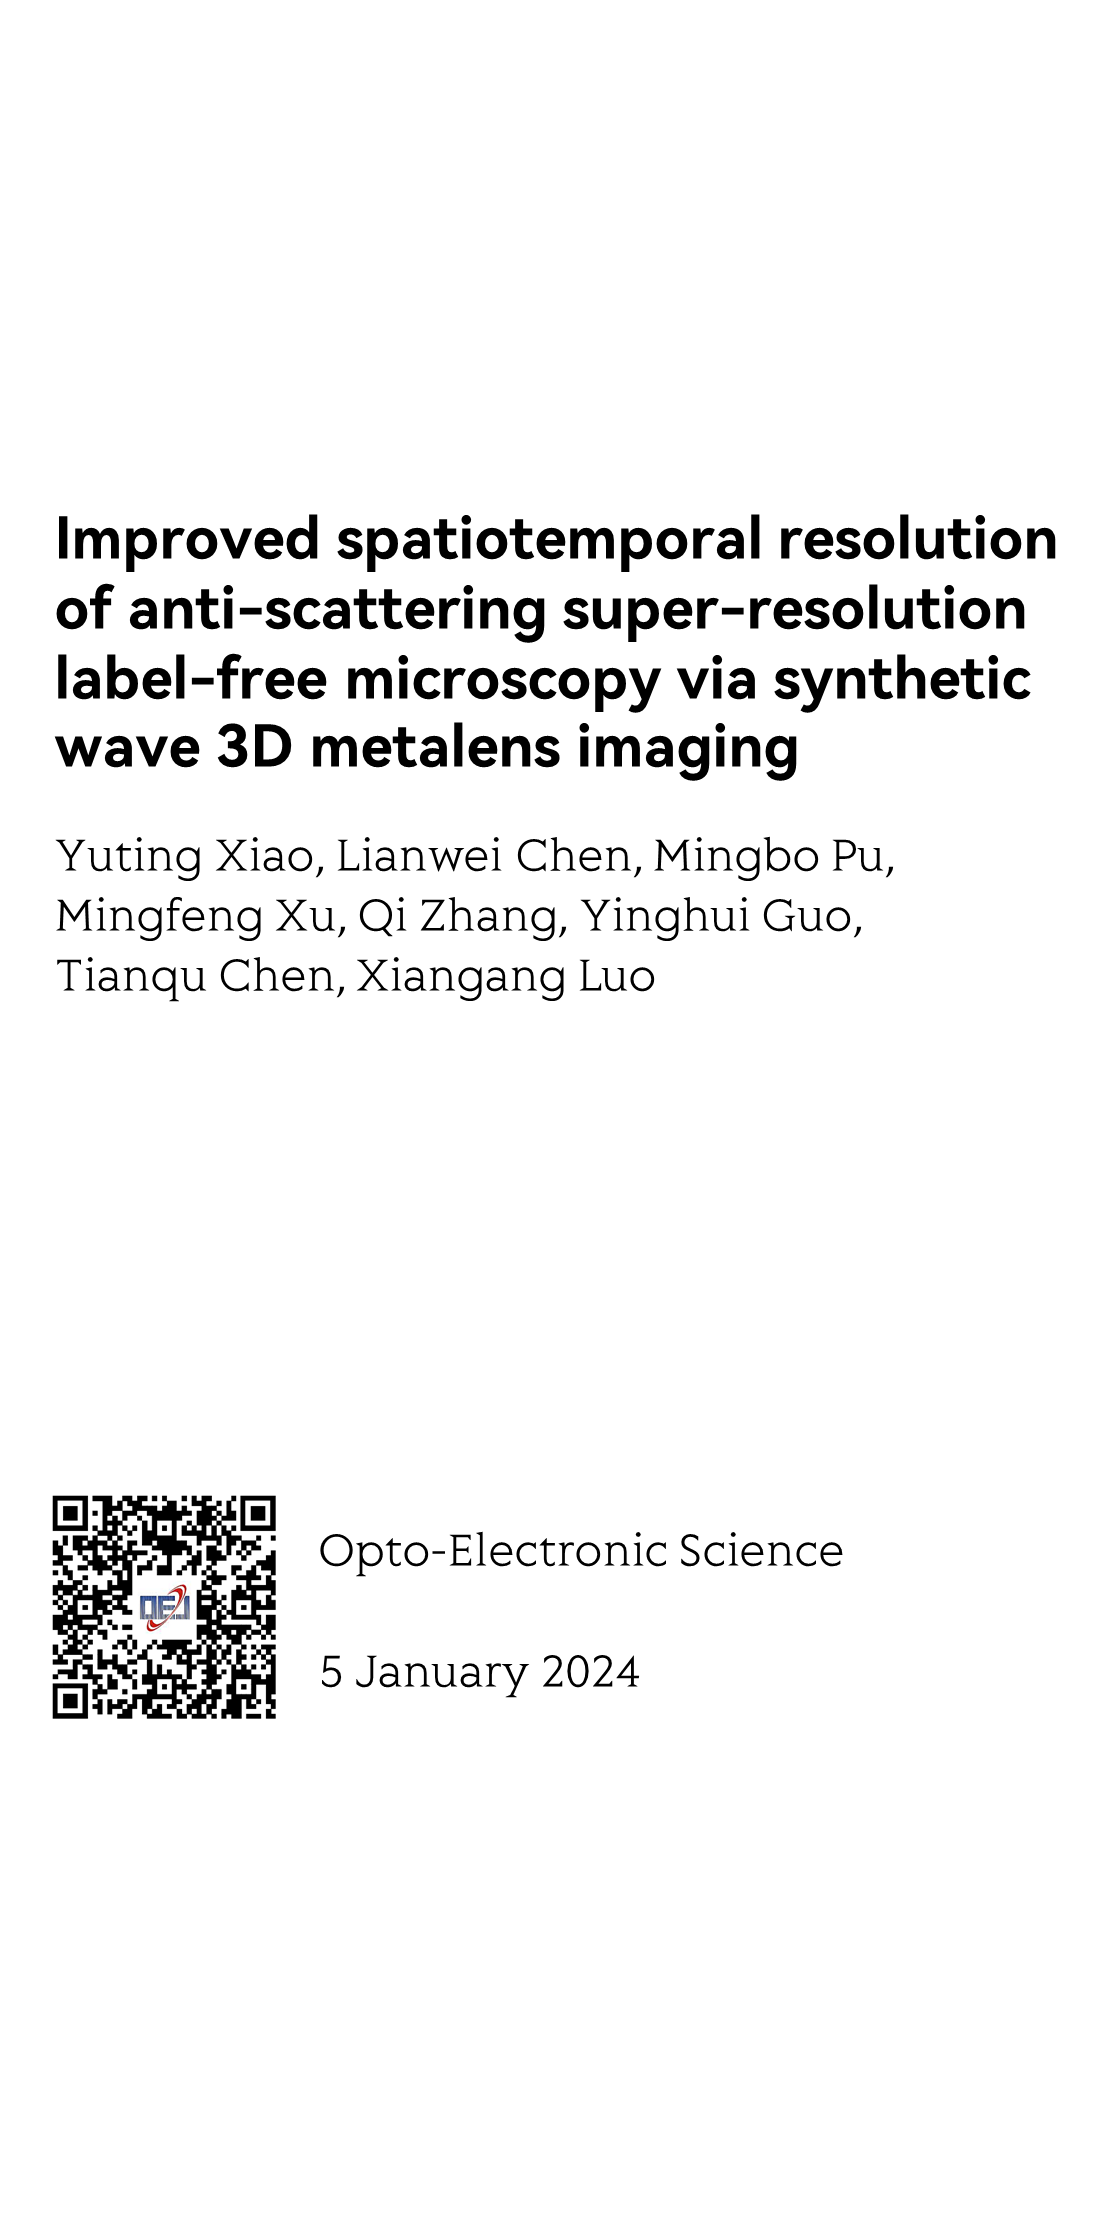 Improved spatiotemporal resolution of anti-scattering super-resolution label-free microscopy via synthetic wave 3D metalens imaging_1